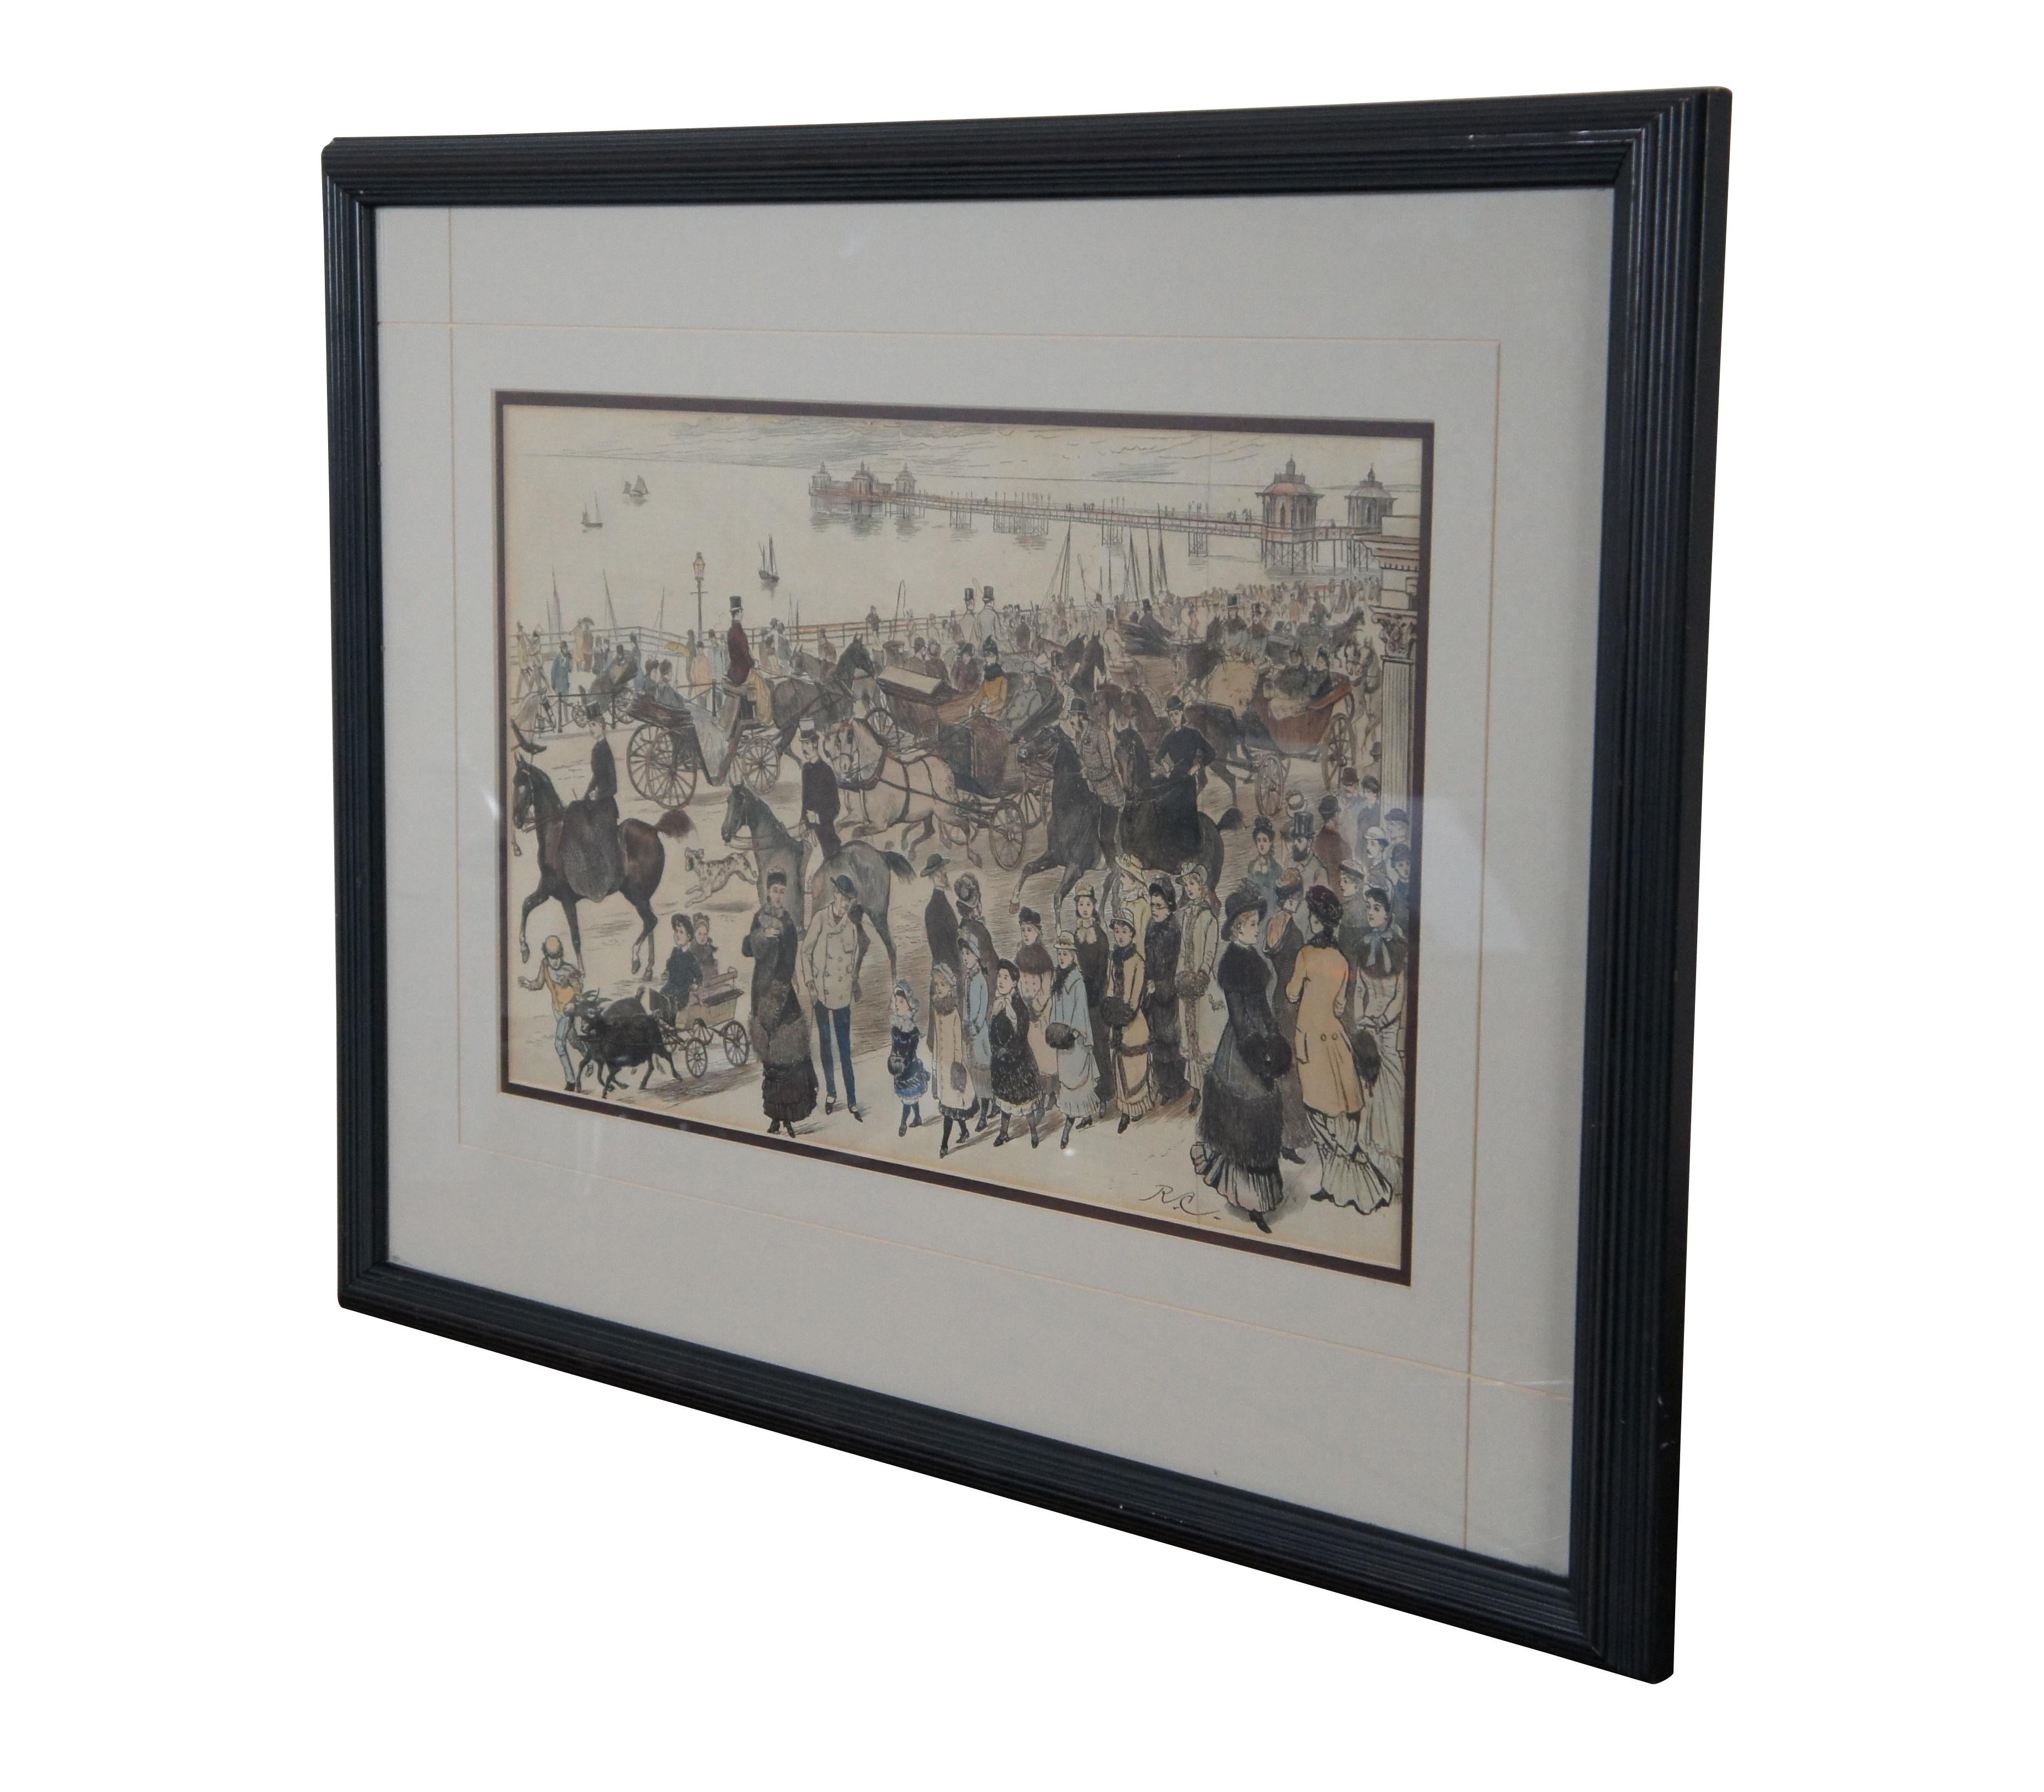 Circa 1879 hand colored engraving titled “Afternoon in the King’s Road” by Randolph Caldecott, showing a throng of people in winter clothing walking along the pier next to the main thoroughfares of the seaside town of Brighton. Published in The